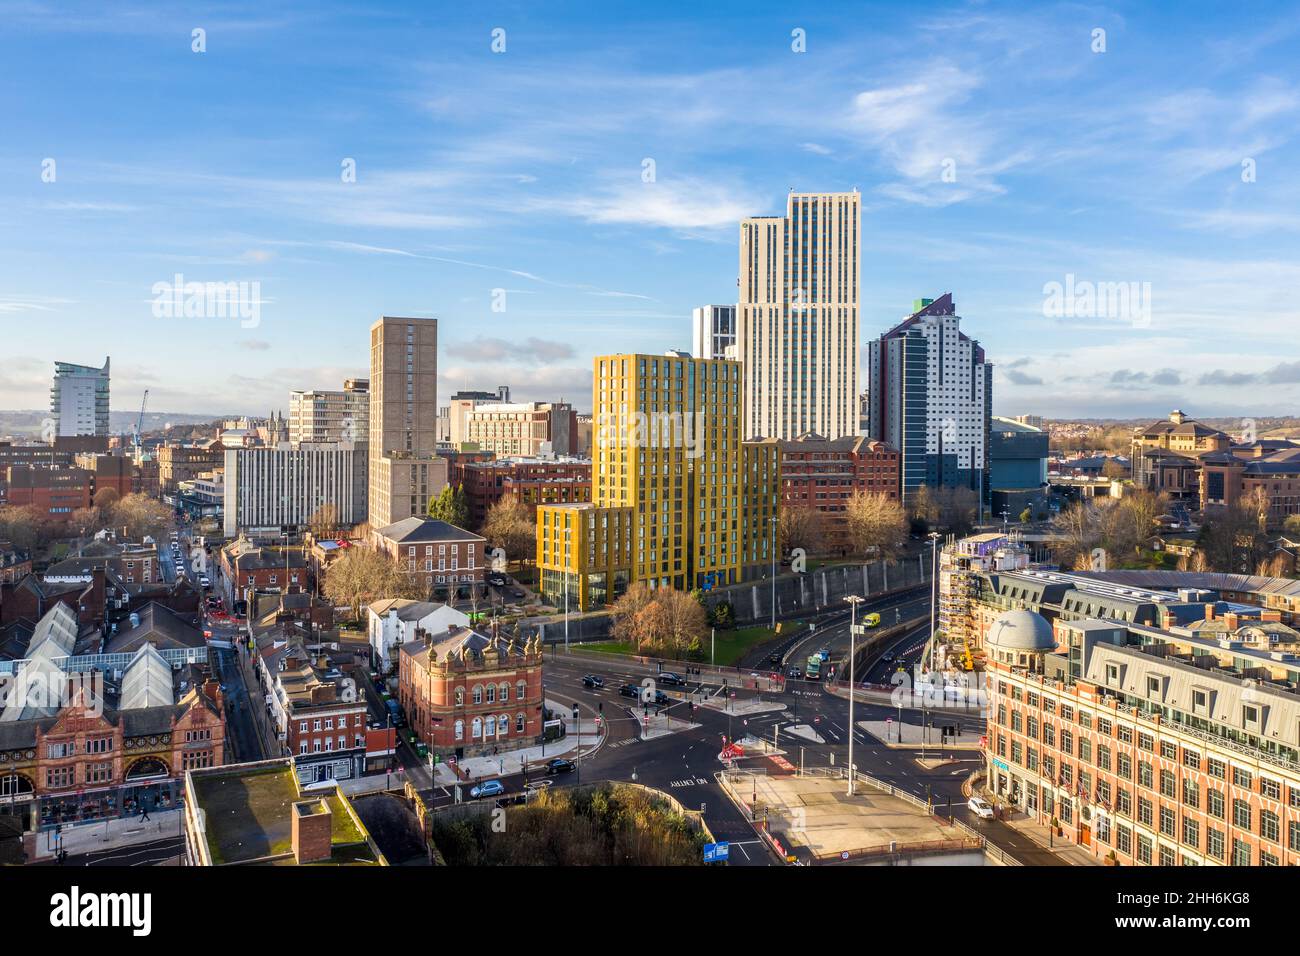 Aerial view of Leeds city cityscape skyline in a colourful and vibrant city life concept Stock Photo